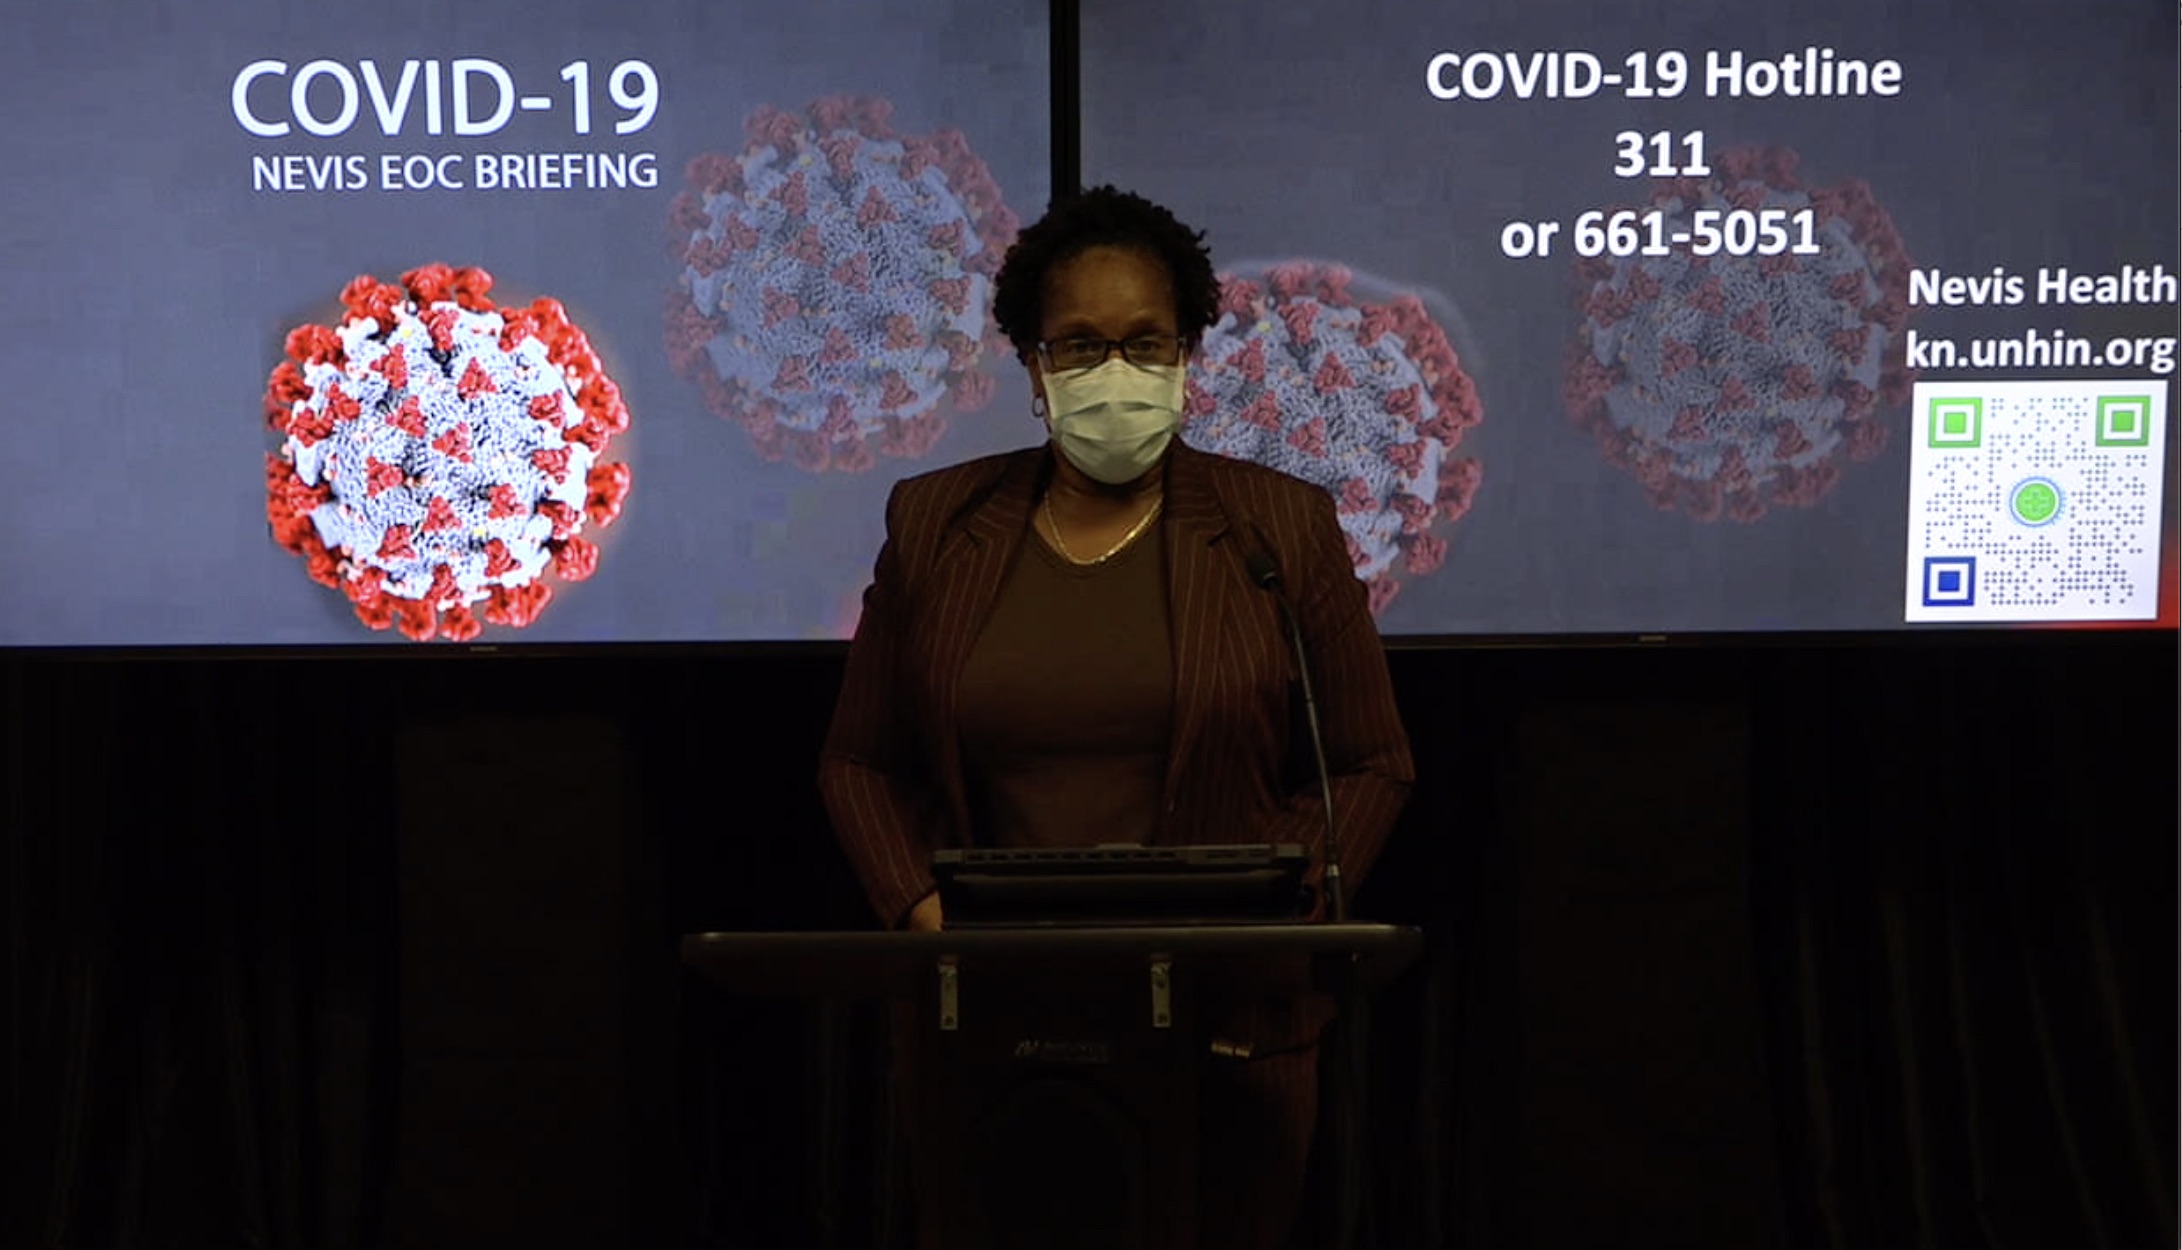 Dr. Judy Nisbett, Chair of the Nevis COVID-19 Task Force, making her presentation at the Nevis COVID-19 Emergency Operations Centre Briefing on October 05, 2020, at Long Point